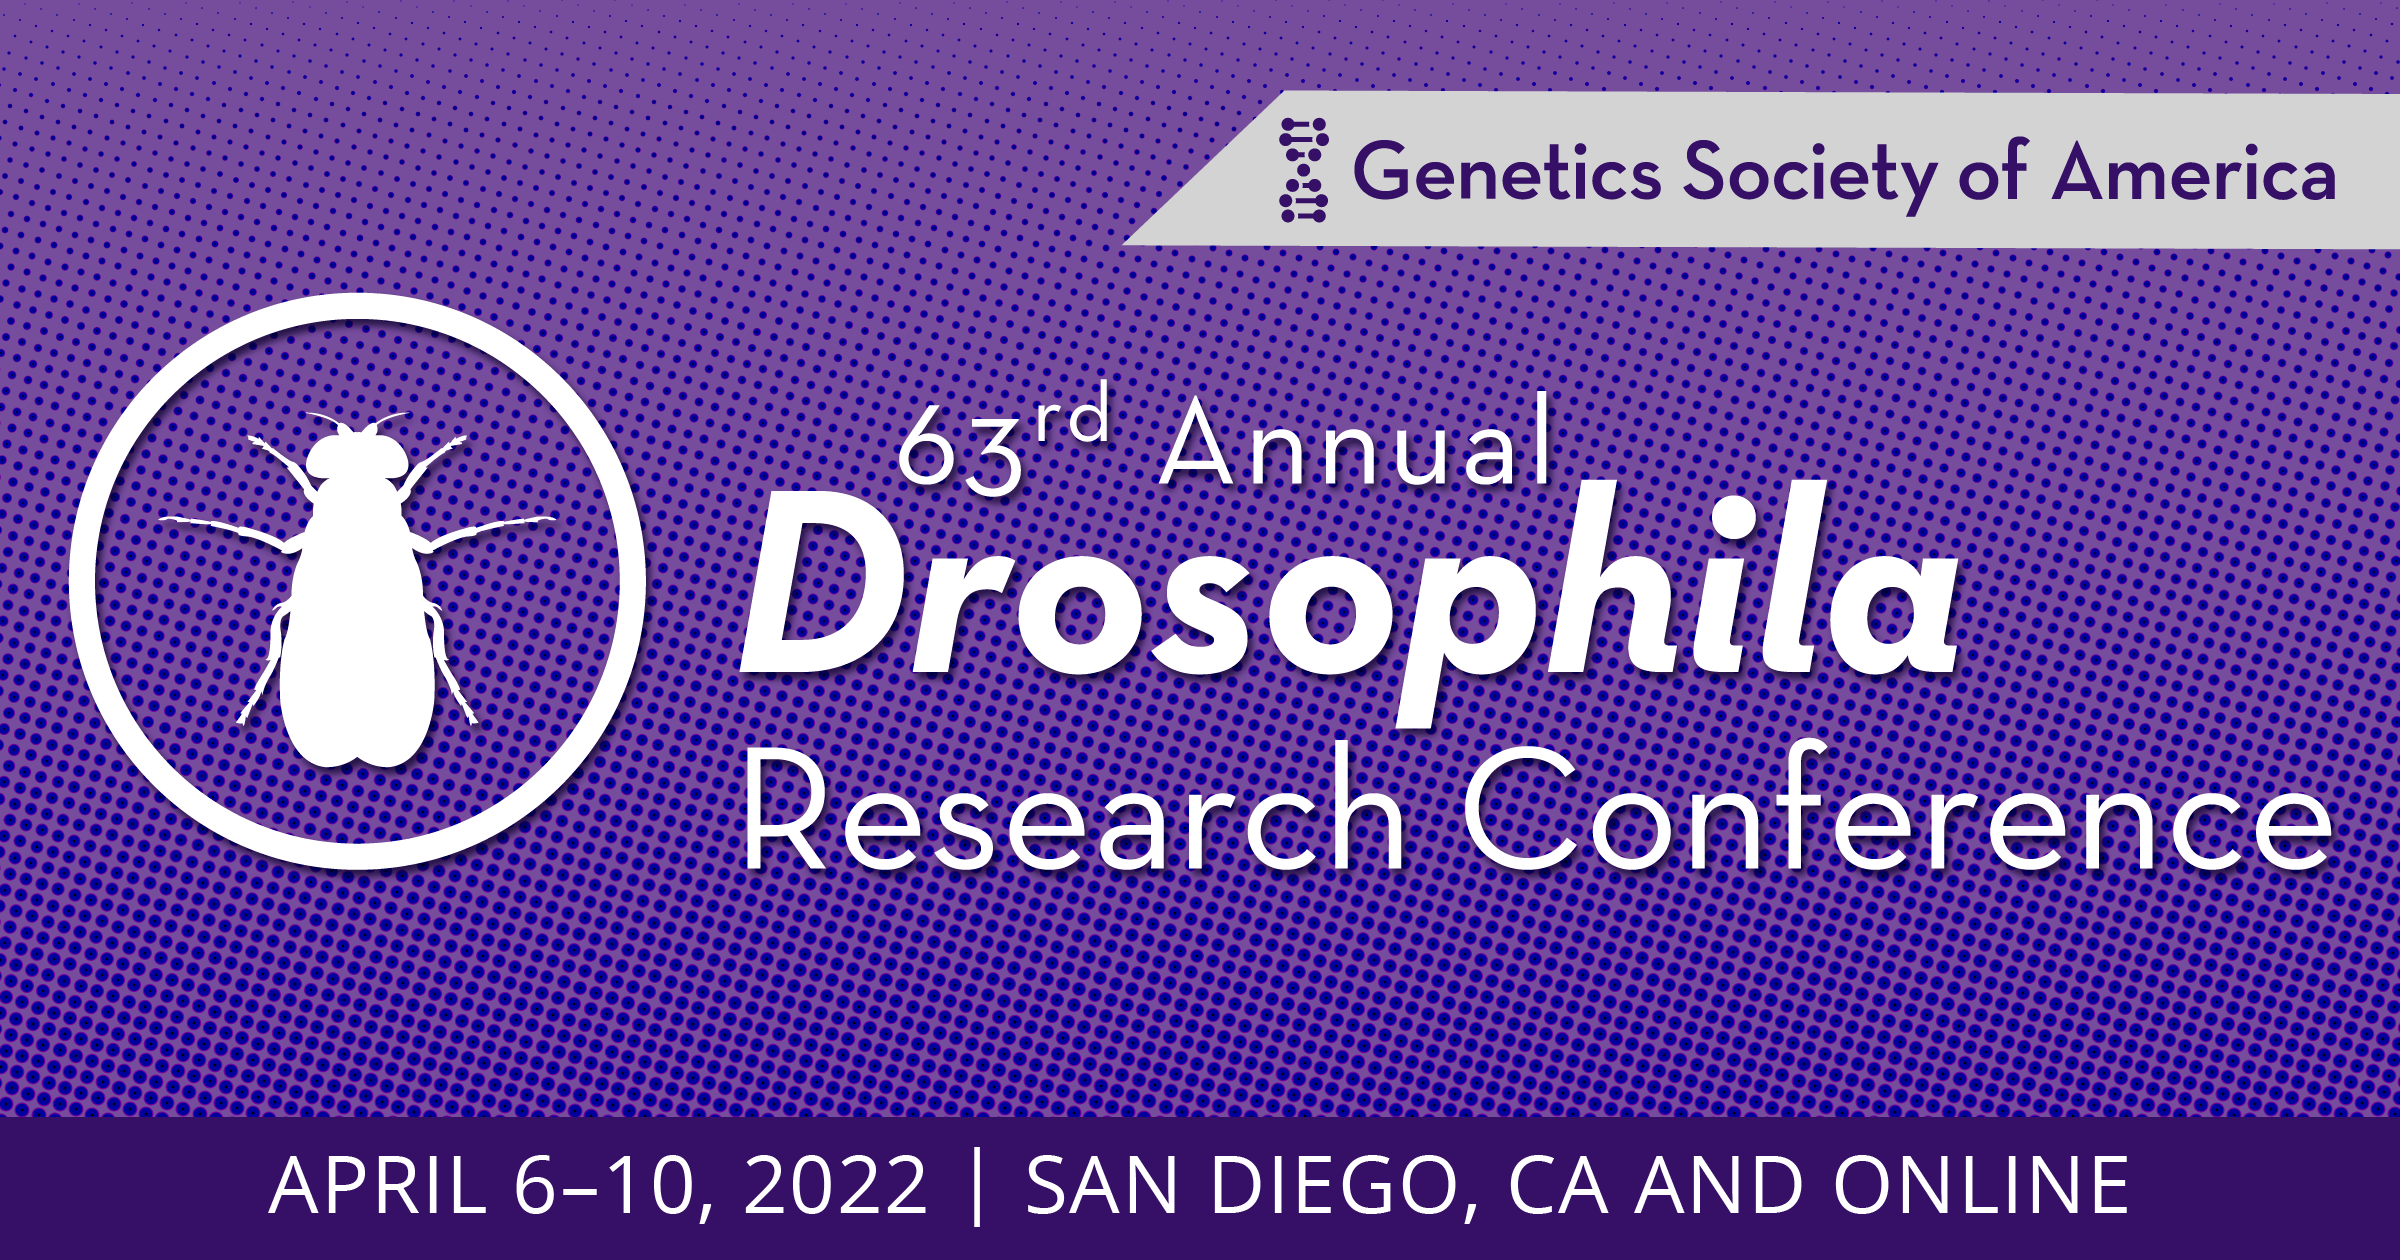 Program and Abstract Books 63rd Annual Drosophila Research Conference